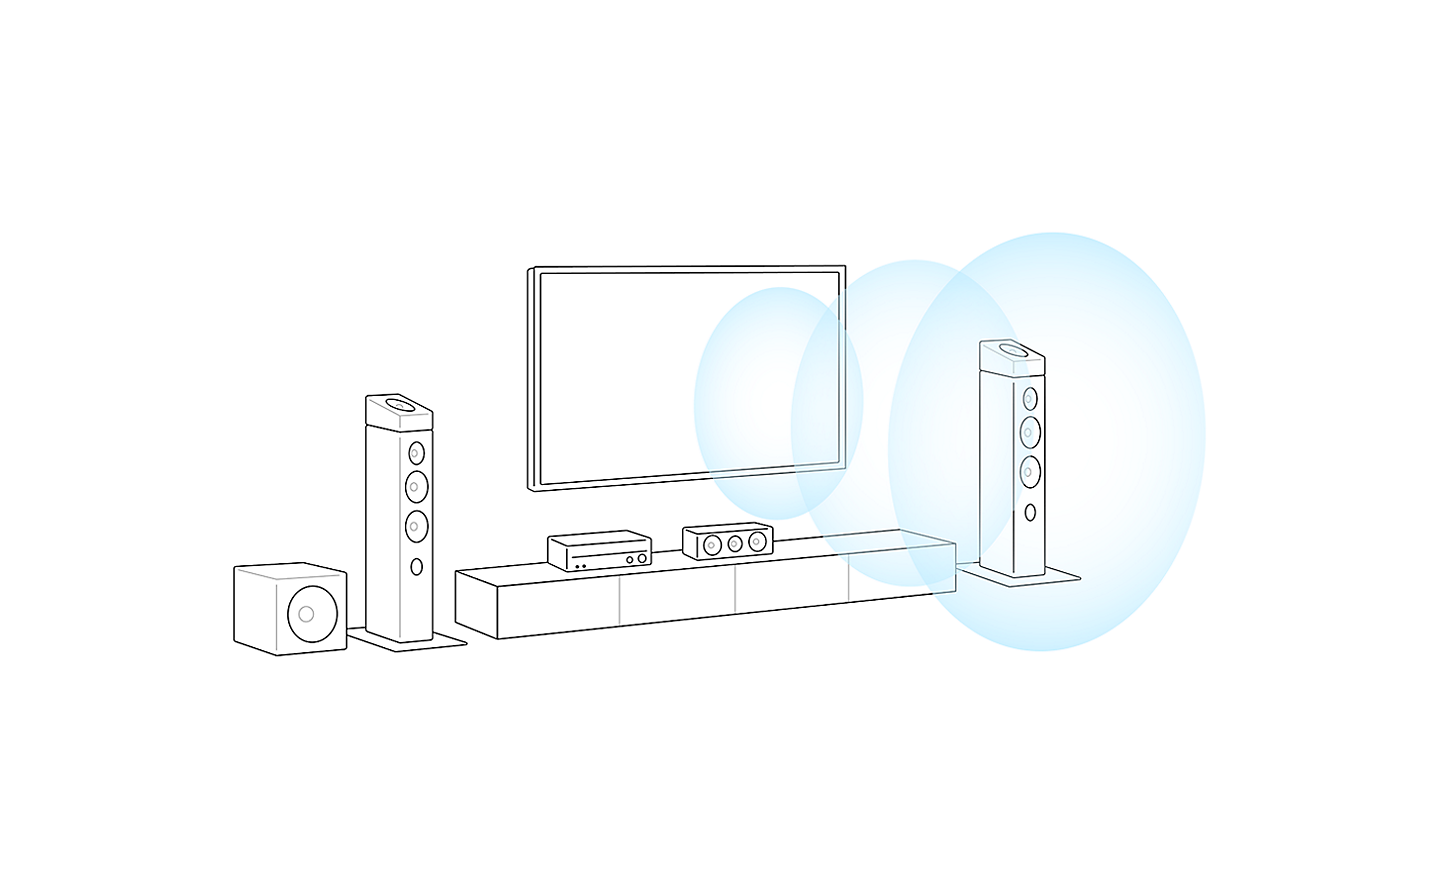 Outline-only image of a TV setup. 3 blue circles are coming out of the centre of the TV representing the sound direction